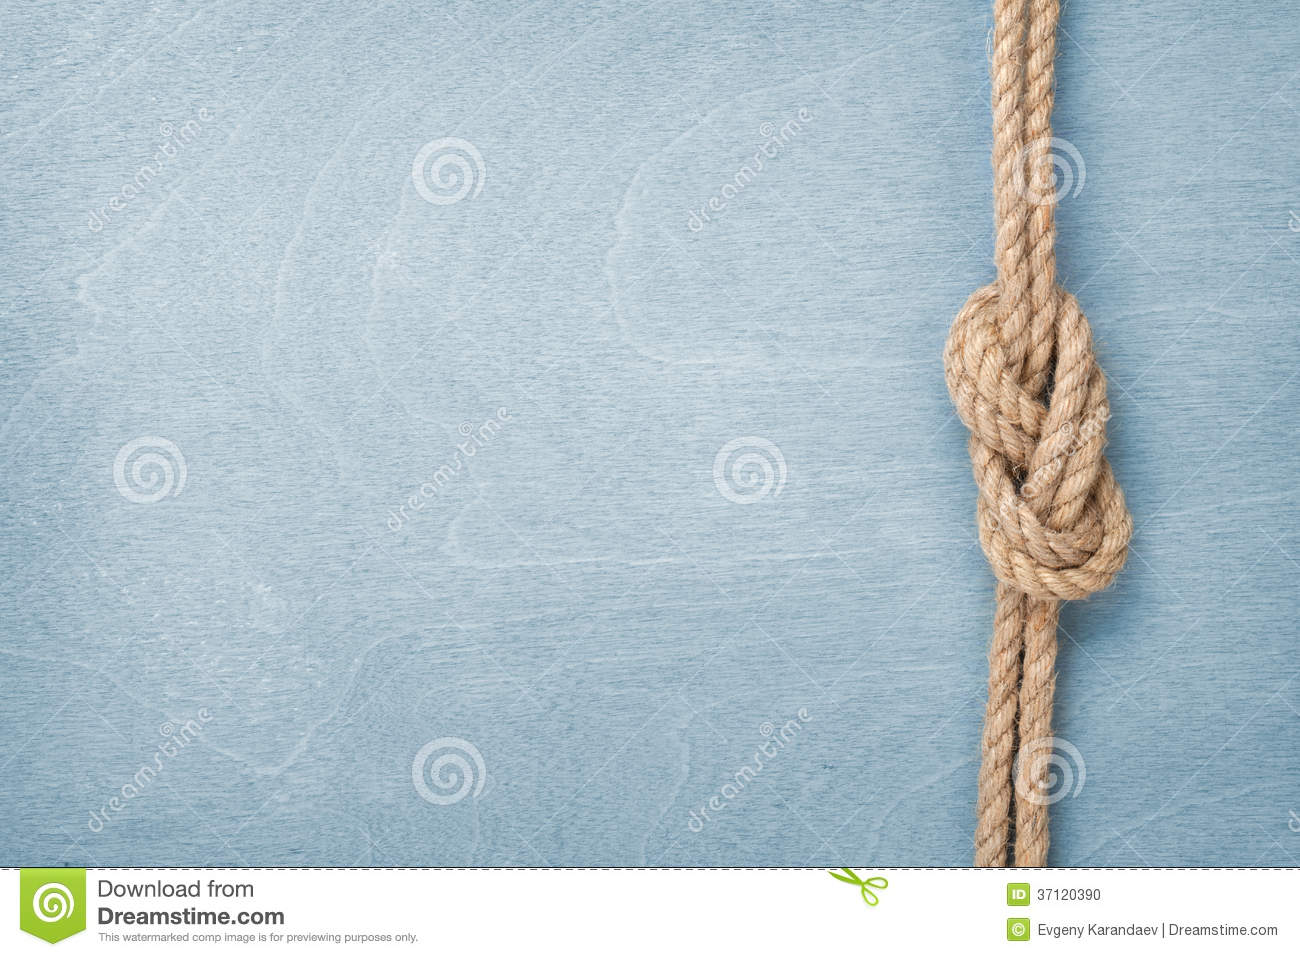 Boat Rope Clipart Ship Rope Knot On Wooden